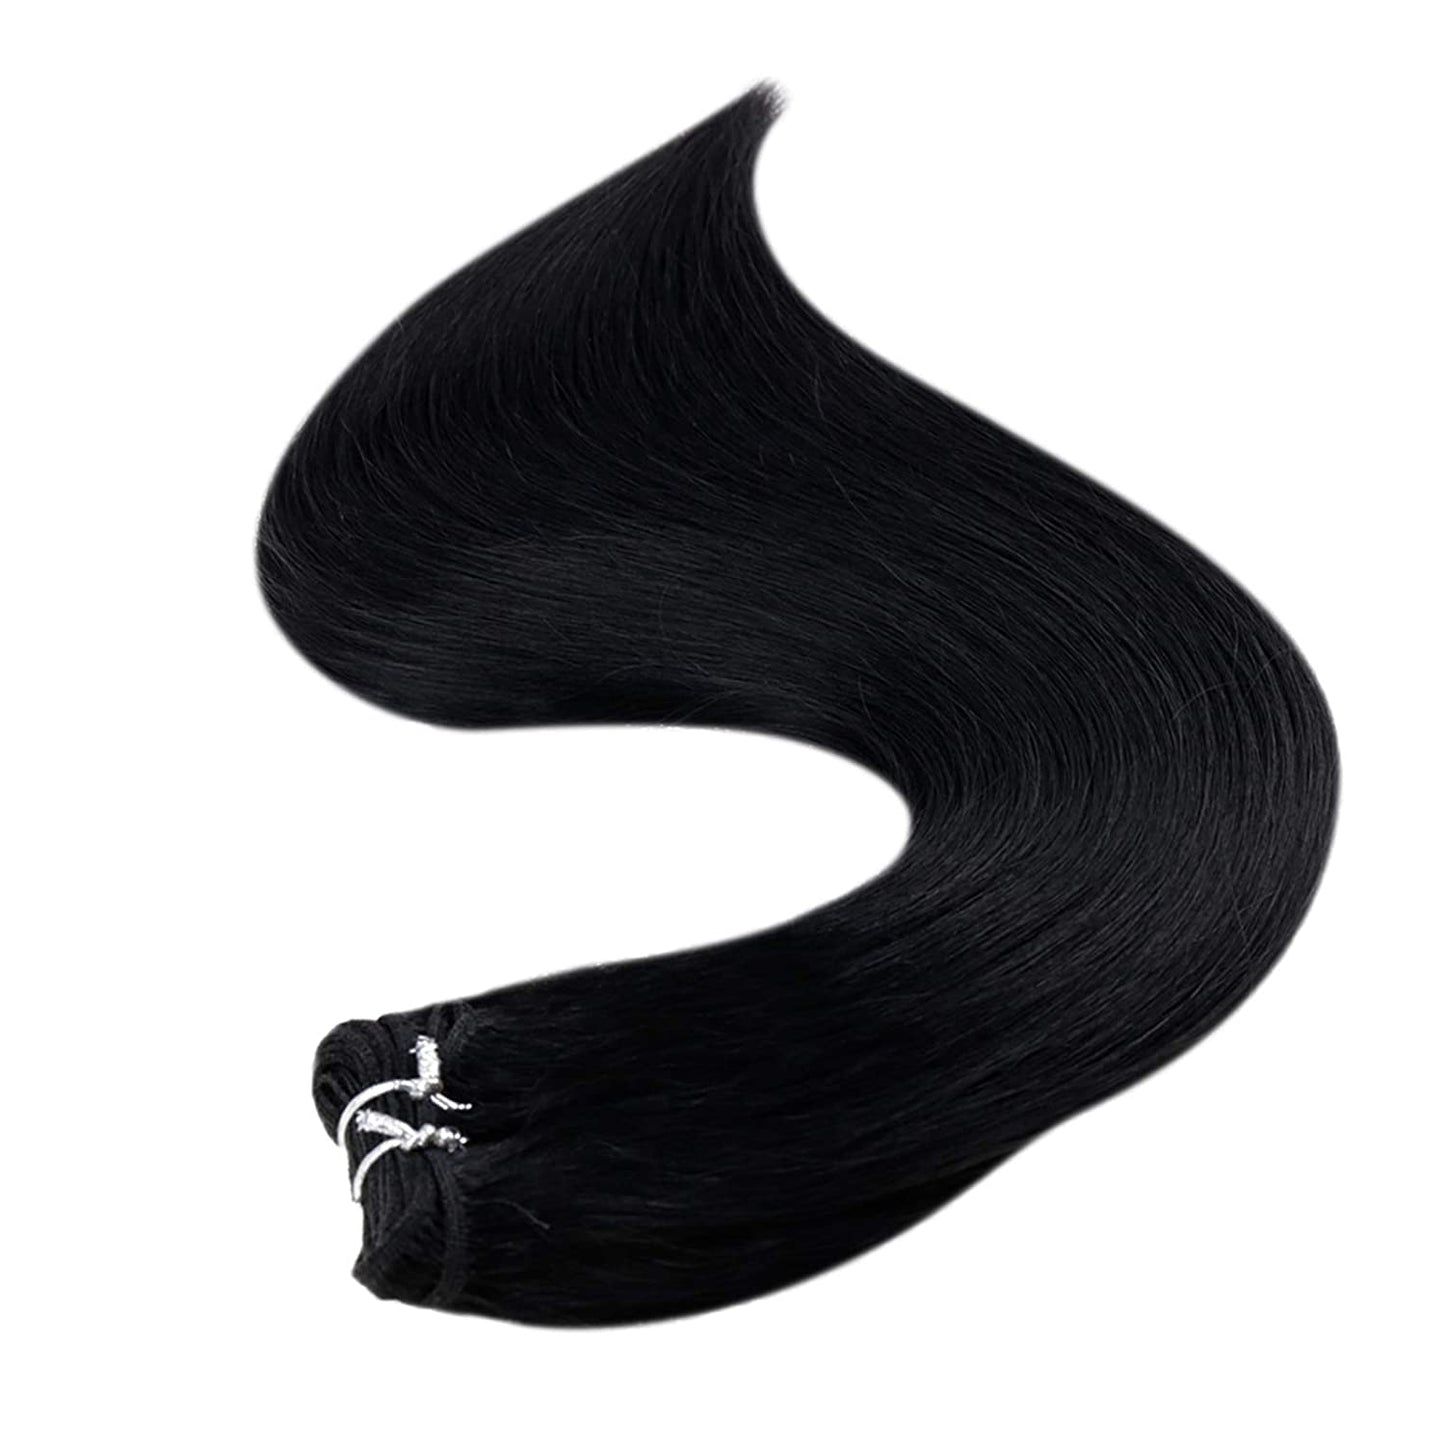 Lush Locks  Sew In Weft Real Human Hair Weft Bundles 16 Inch Remy Hair Extensions Jet Black Hair Extension 100g Straight Double Wefted Hair Bundles